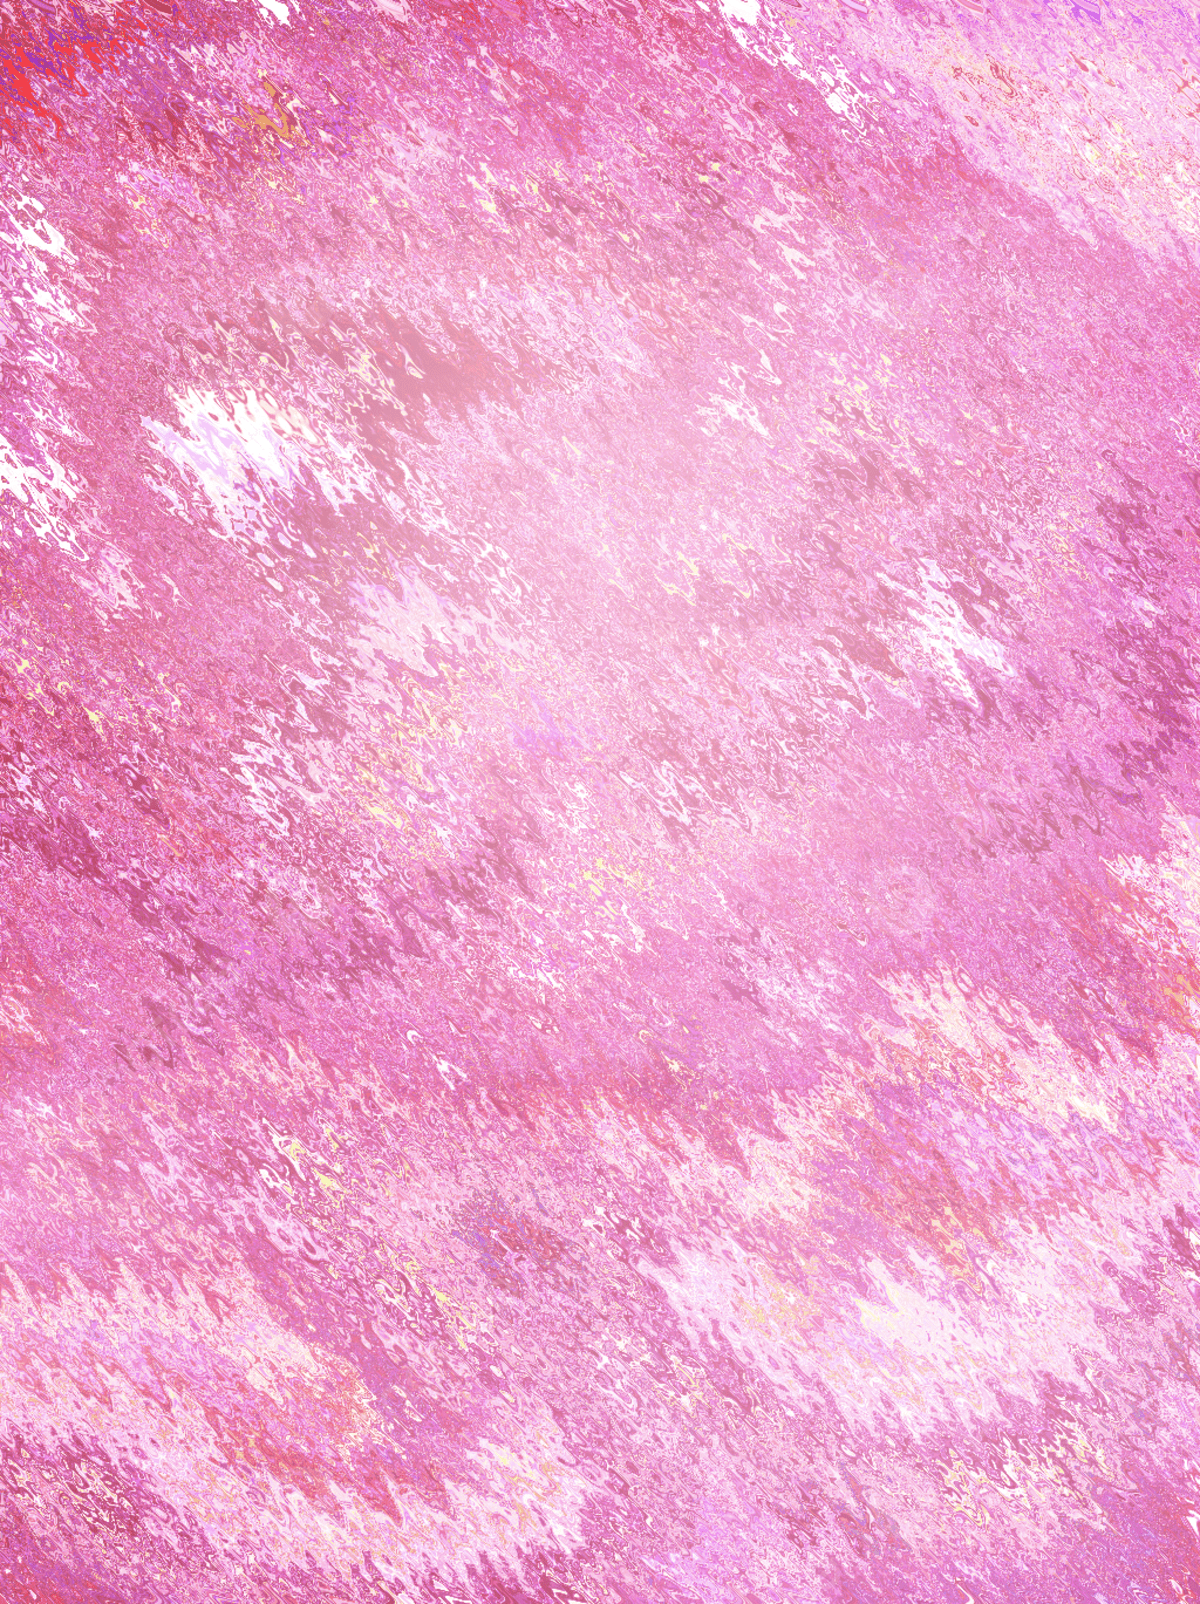 Dreamy Cherry Pink Aesthetic Simple Ins Wind Wallpaper Background Wallpaper Image For Free Download